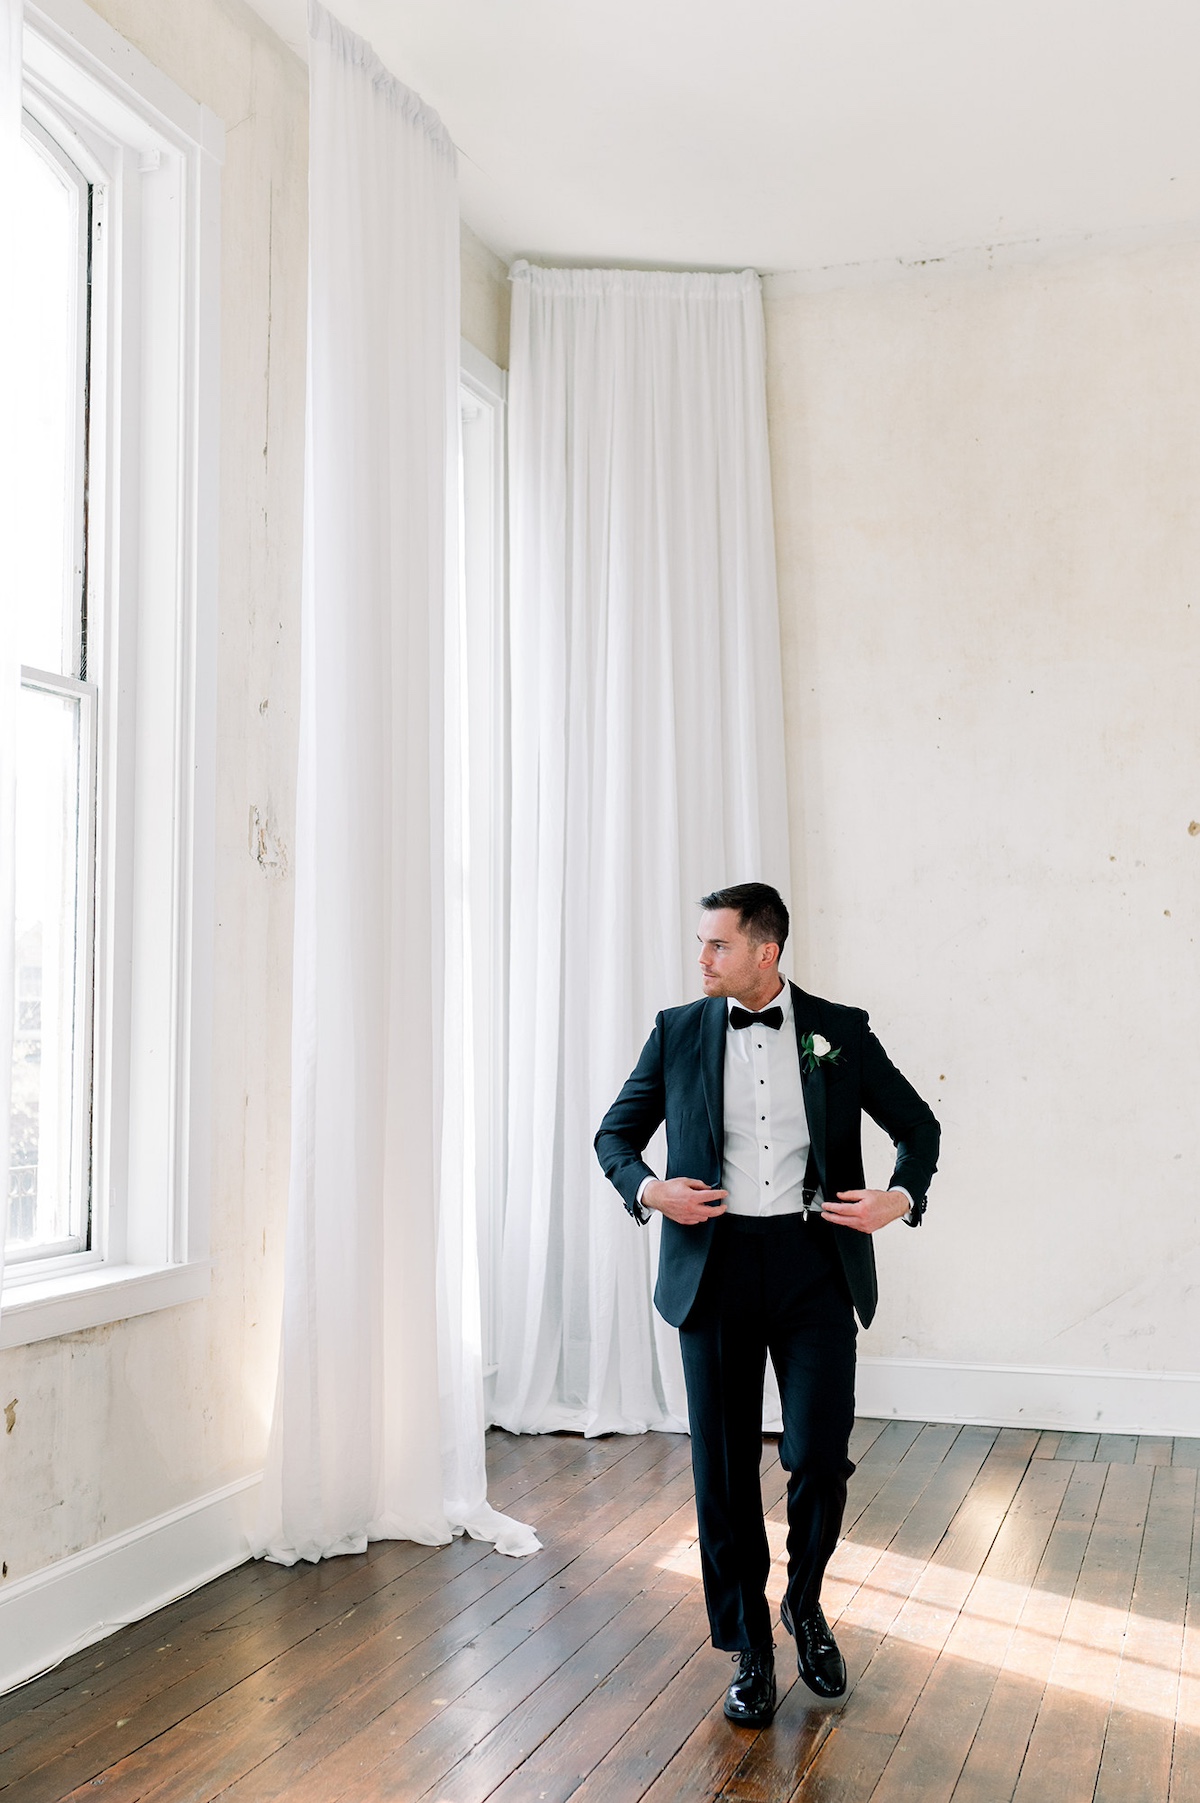 Artful editorial portrait of the groom, basking in natural light, emphasizing the high-end details of his wedding attire.